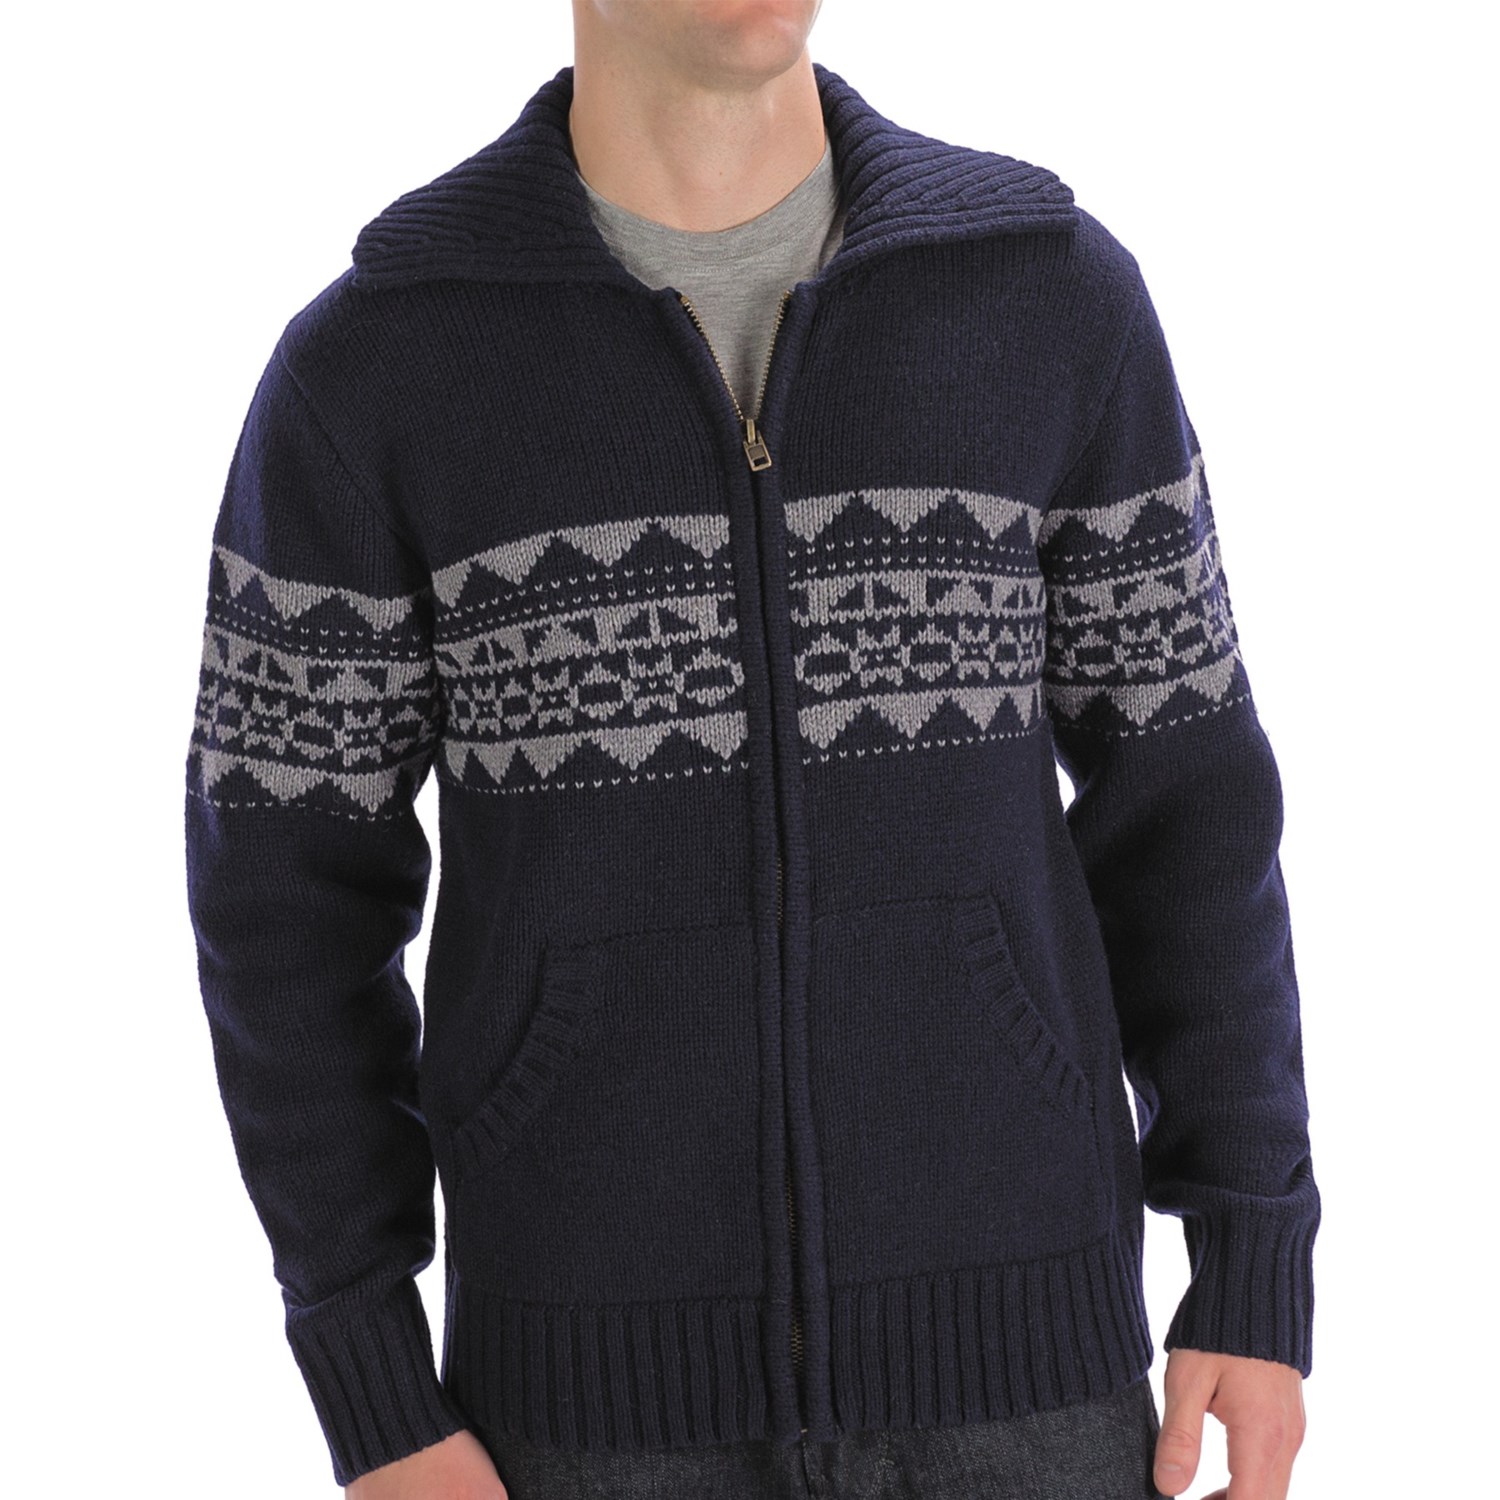 Boston Traders Patterned Wool Cardigan Sweater (For Men) - Save 52%